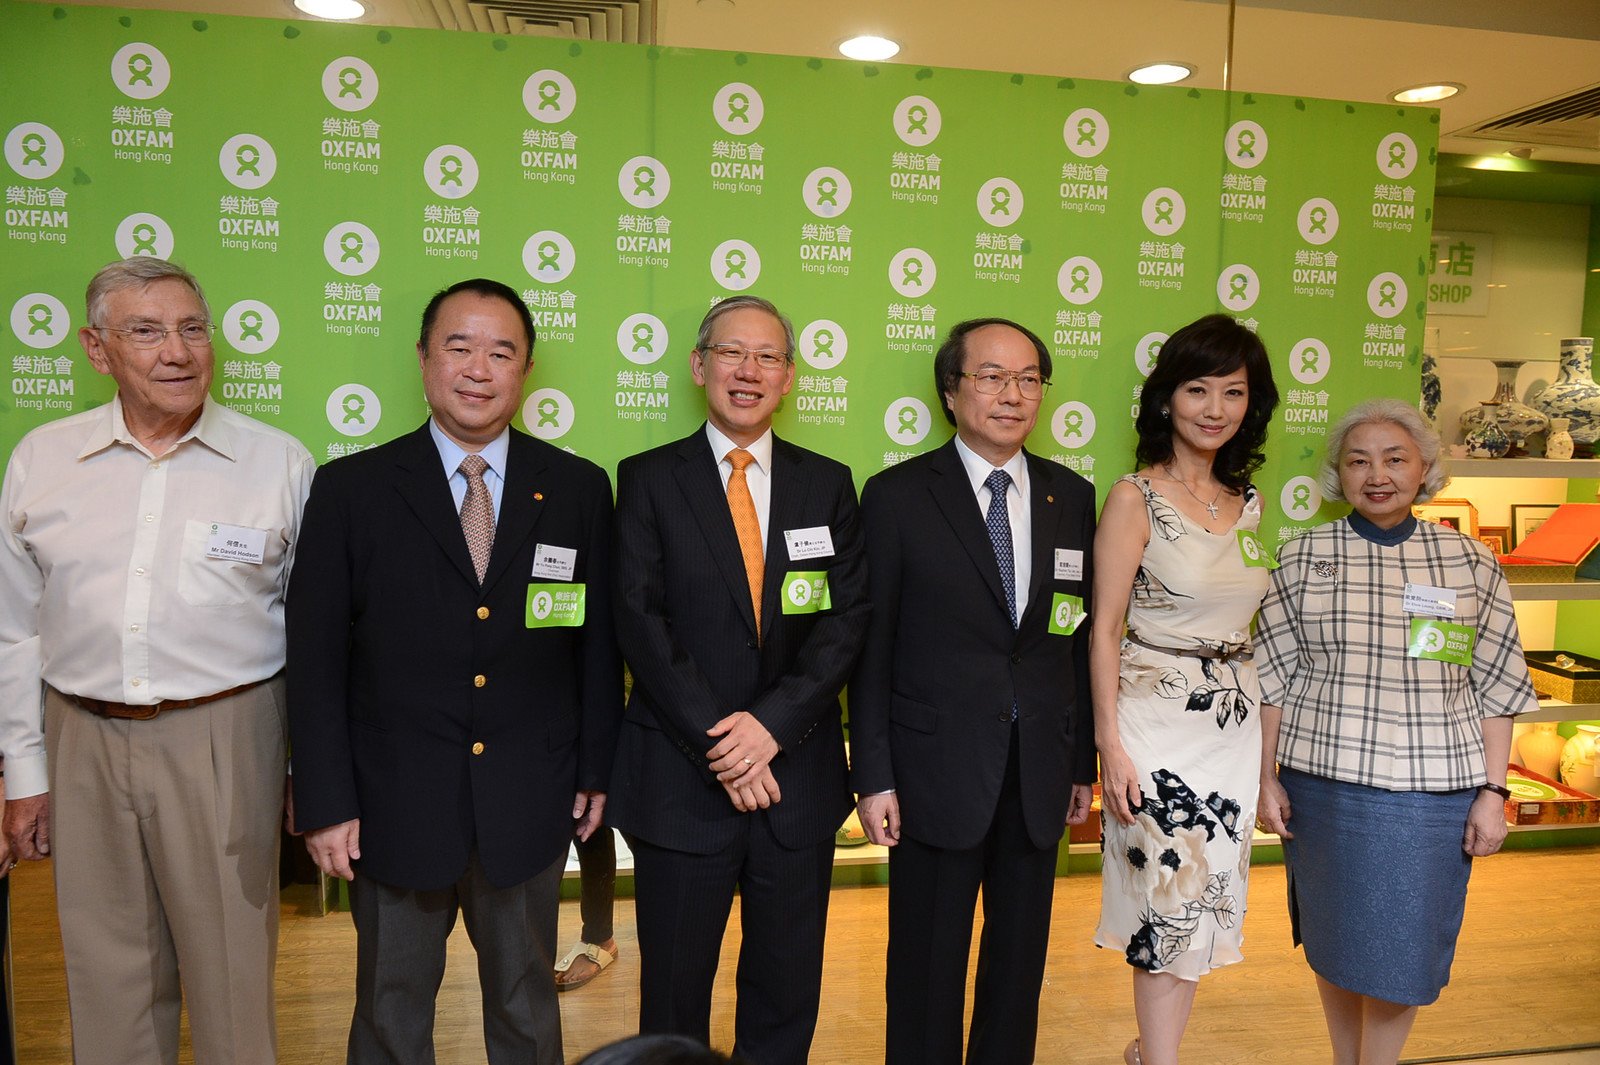 (From left) Oxfam Hong Kong Council Member David Hodson, Hong Kong Mei Zhou Association Chairman Mr Yu Pang Chun, Oxfam Hong Kong Council Chair Dr Lo Chi Kin, Four Seas Group Chairman Dr Stephen Tai, Oxfam Ambassador Ms Angie Chiu and Oxfam Hong Kong Council Member The Hon Elsie Leung officiated at the Opening Ceremony of Oxfam Designers’ Label Week.